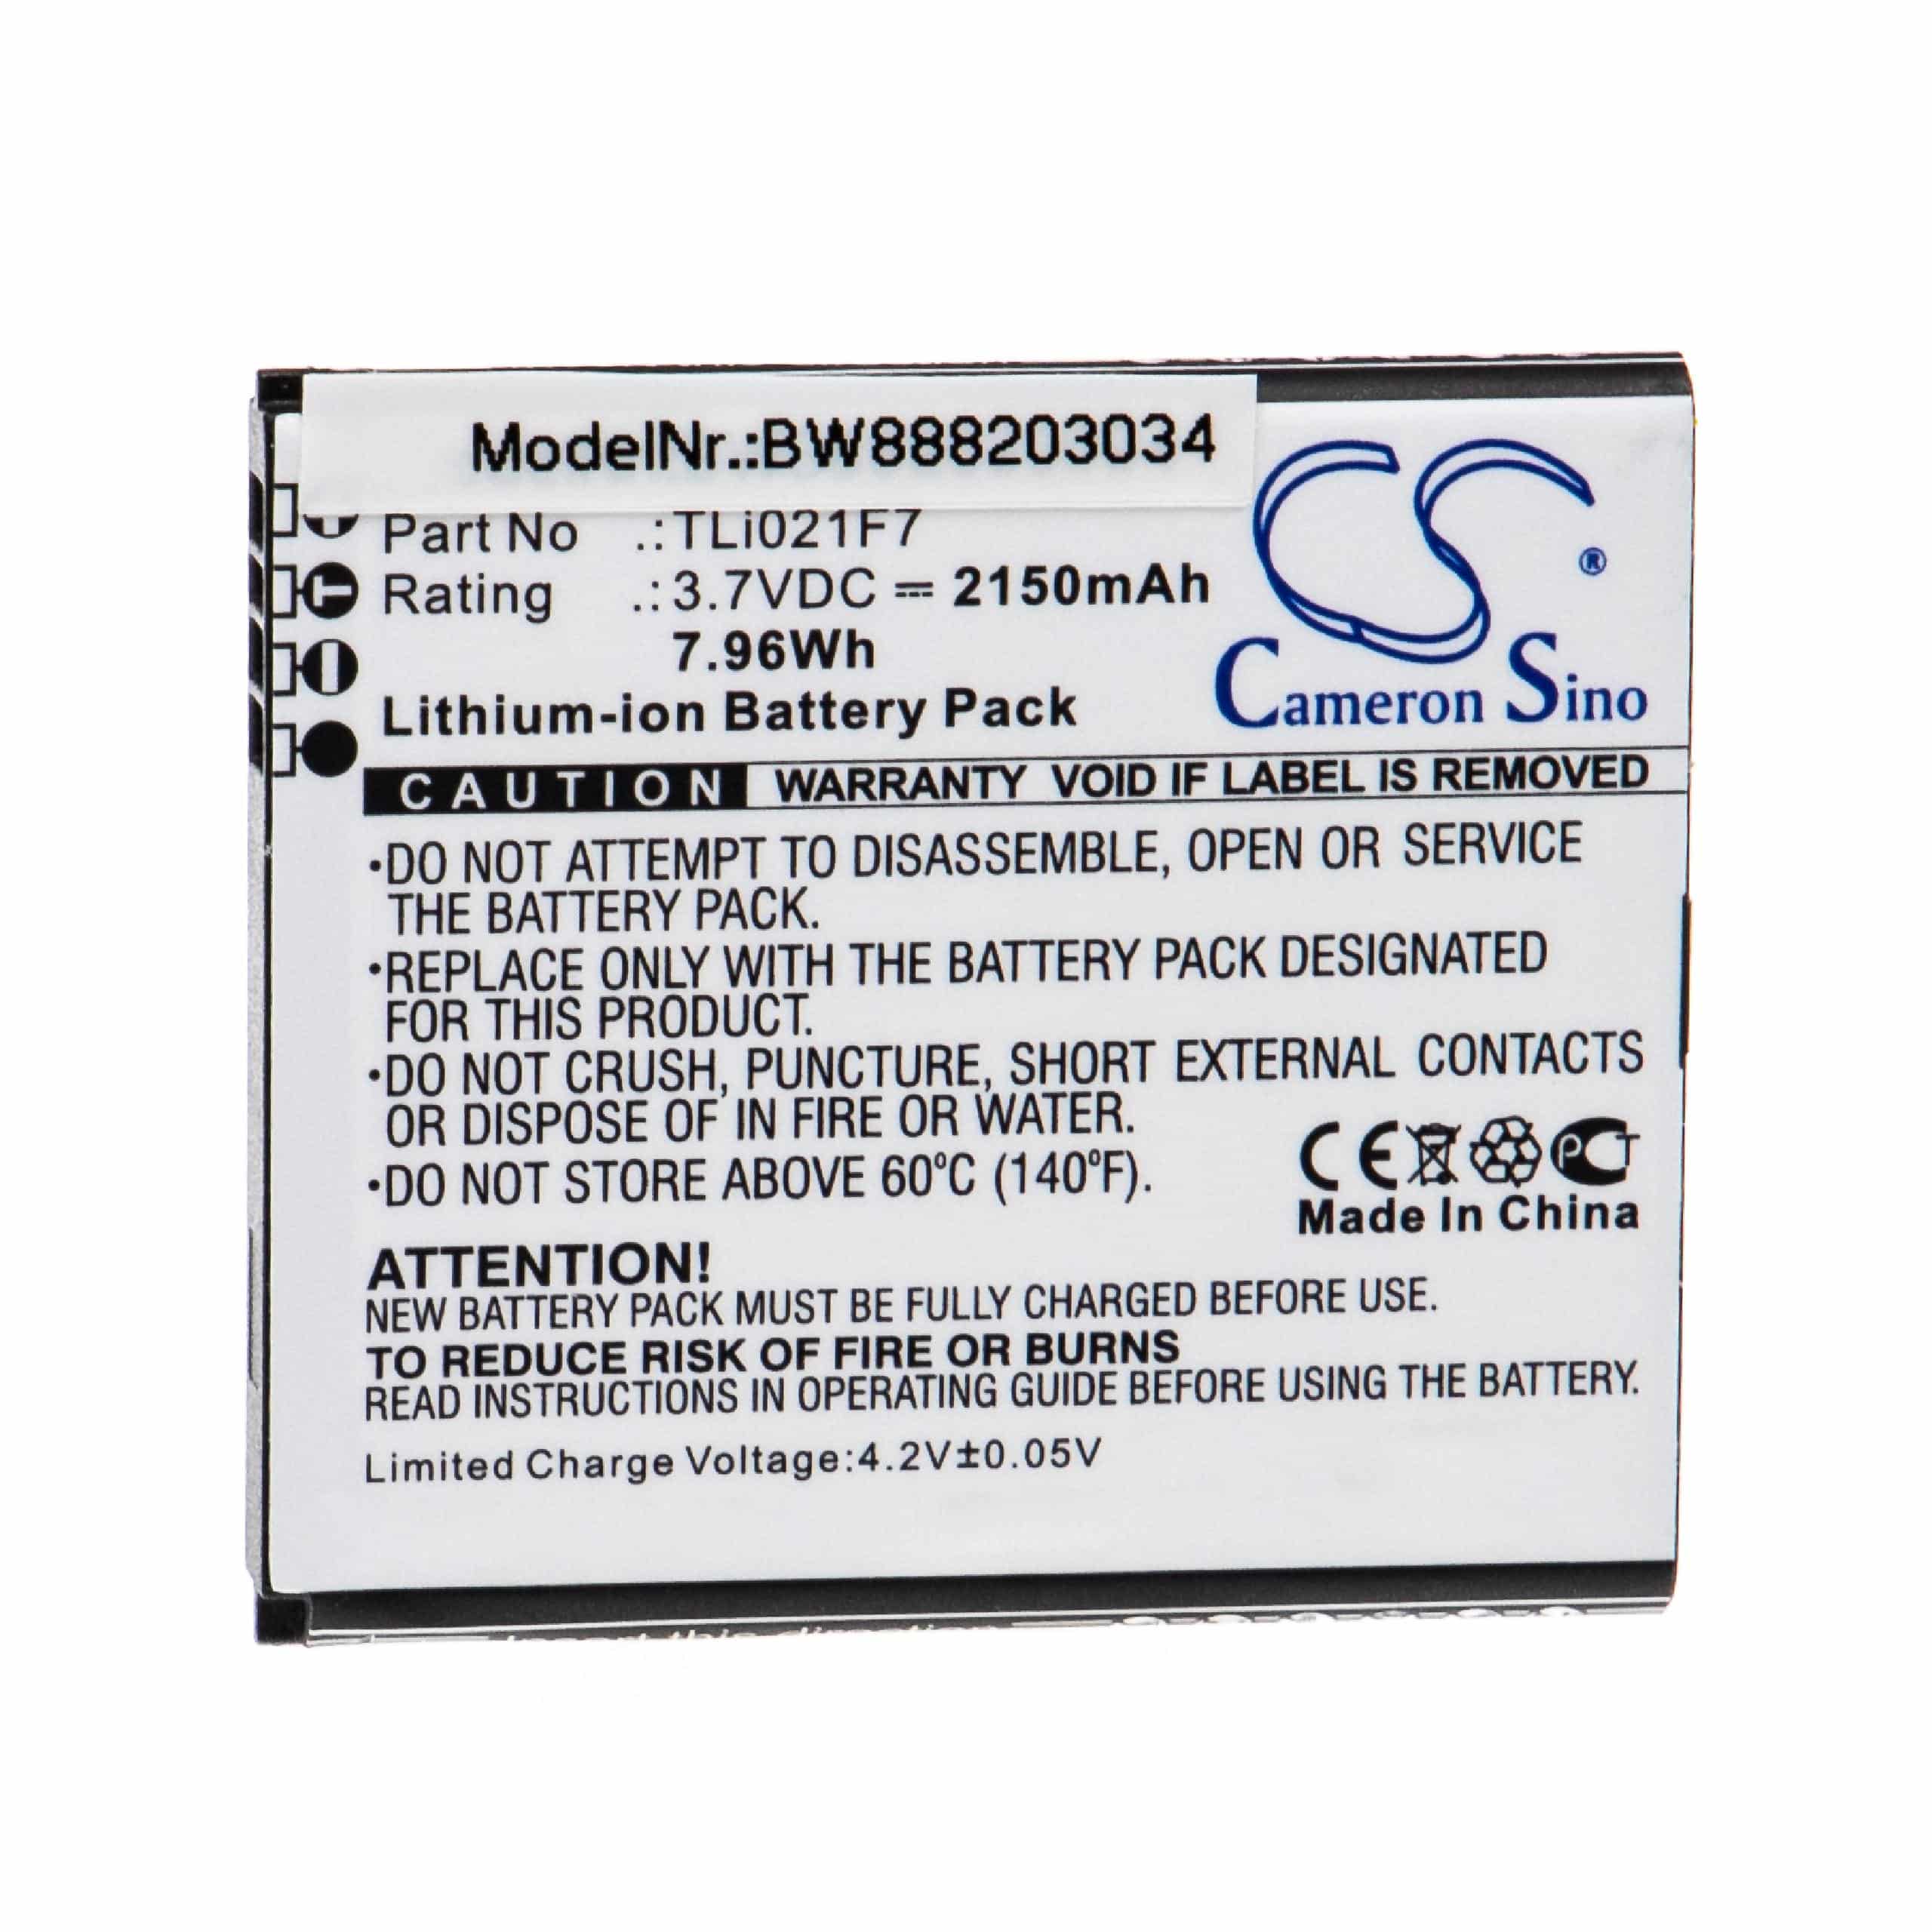 Mobile Router Battery Replacement for Alcatel TLi021F7 - 2150mAh 3.7V Li-Ion